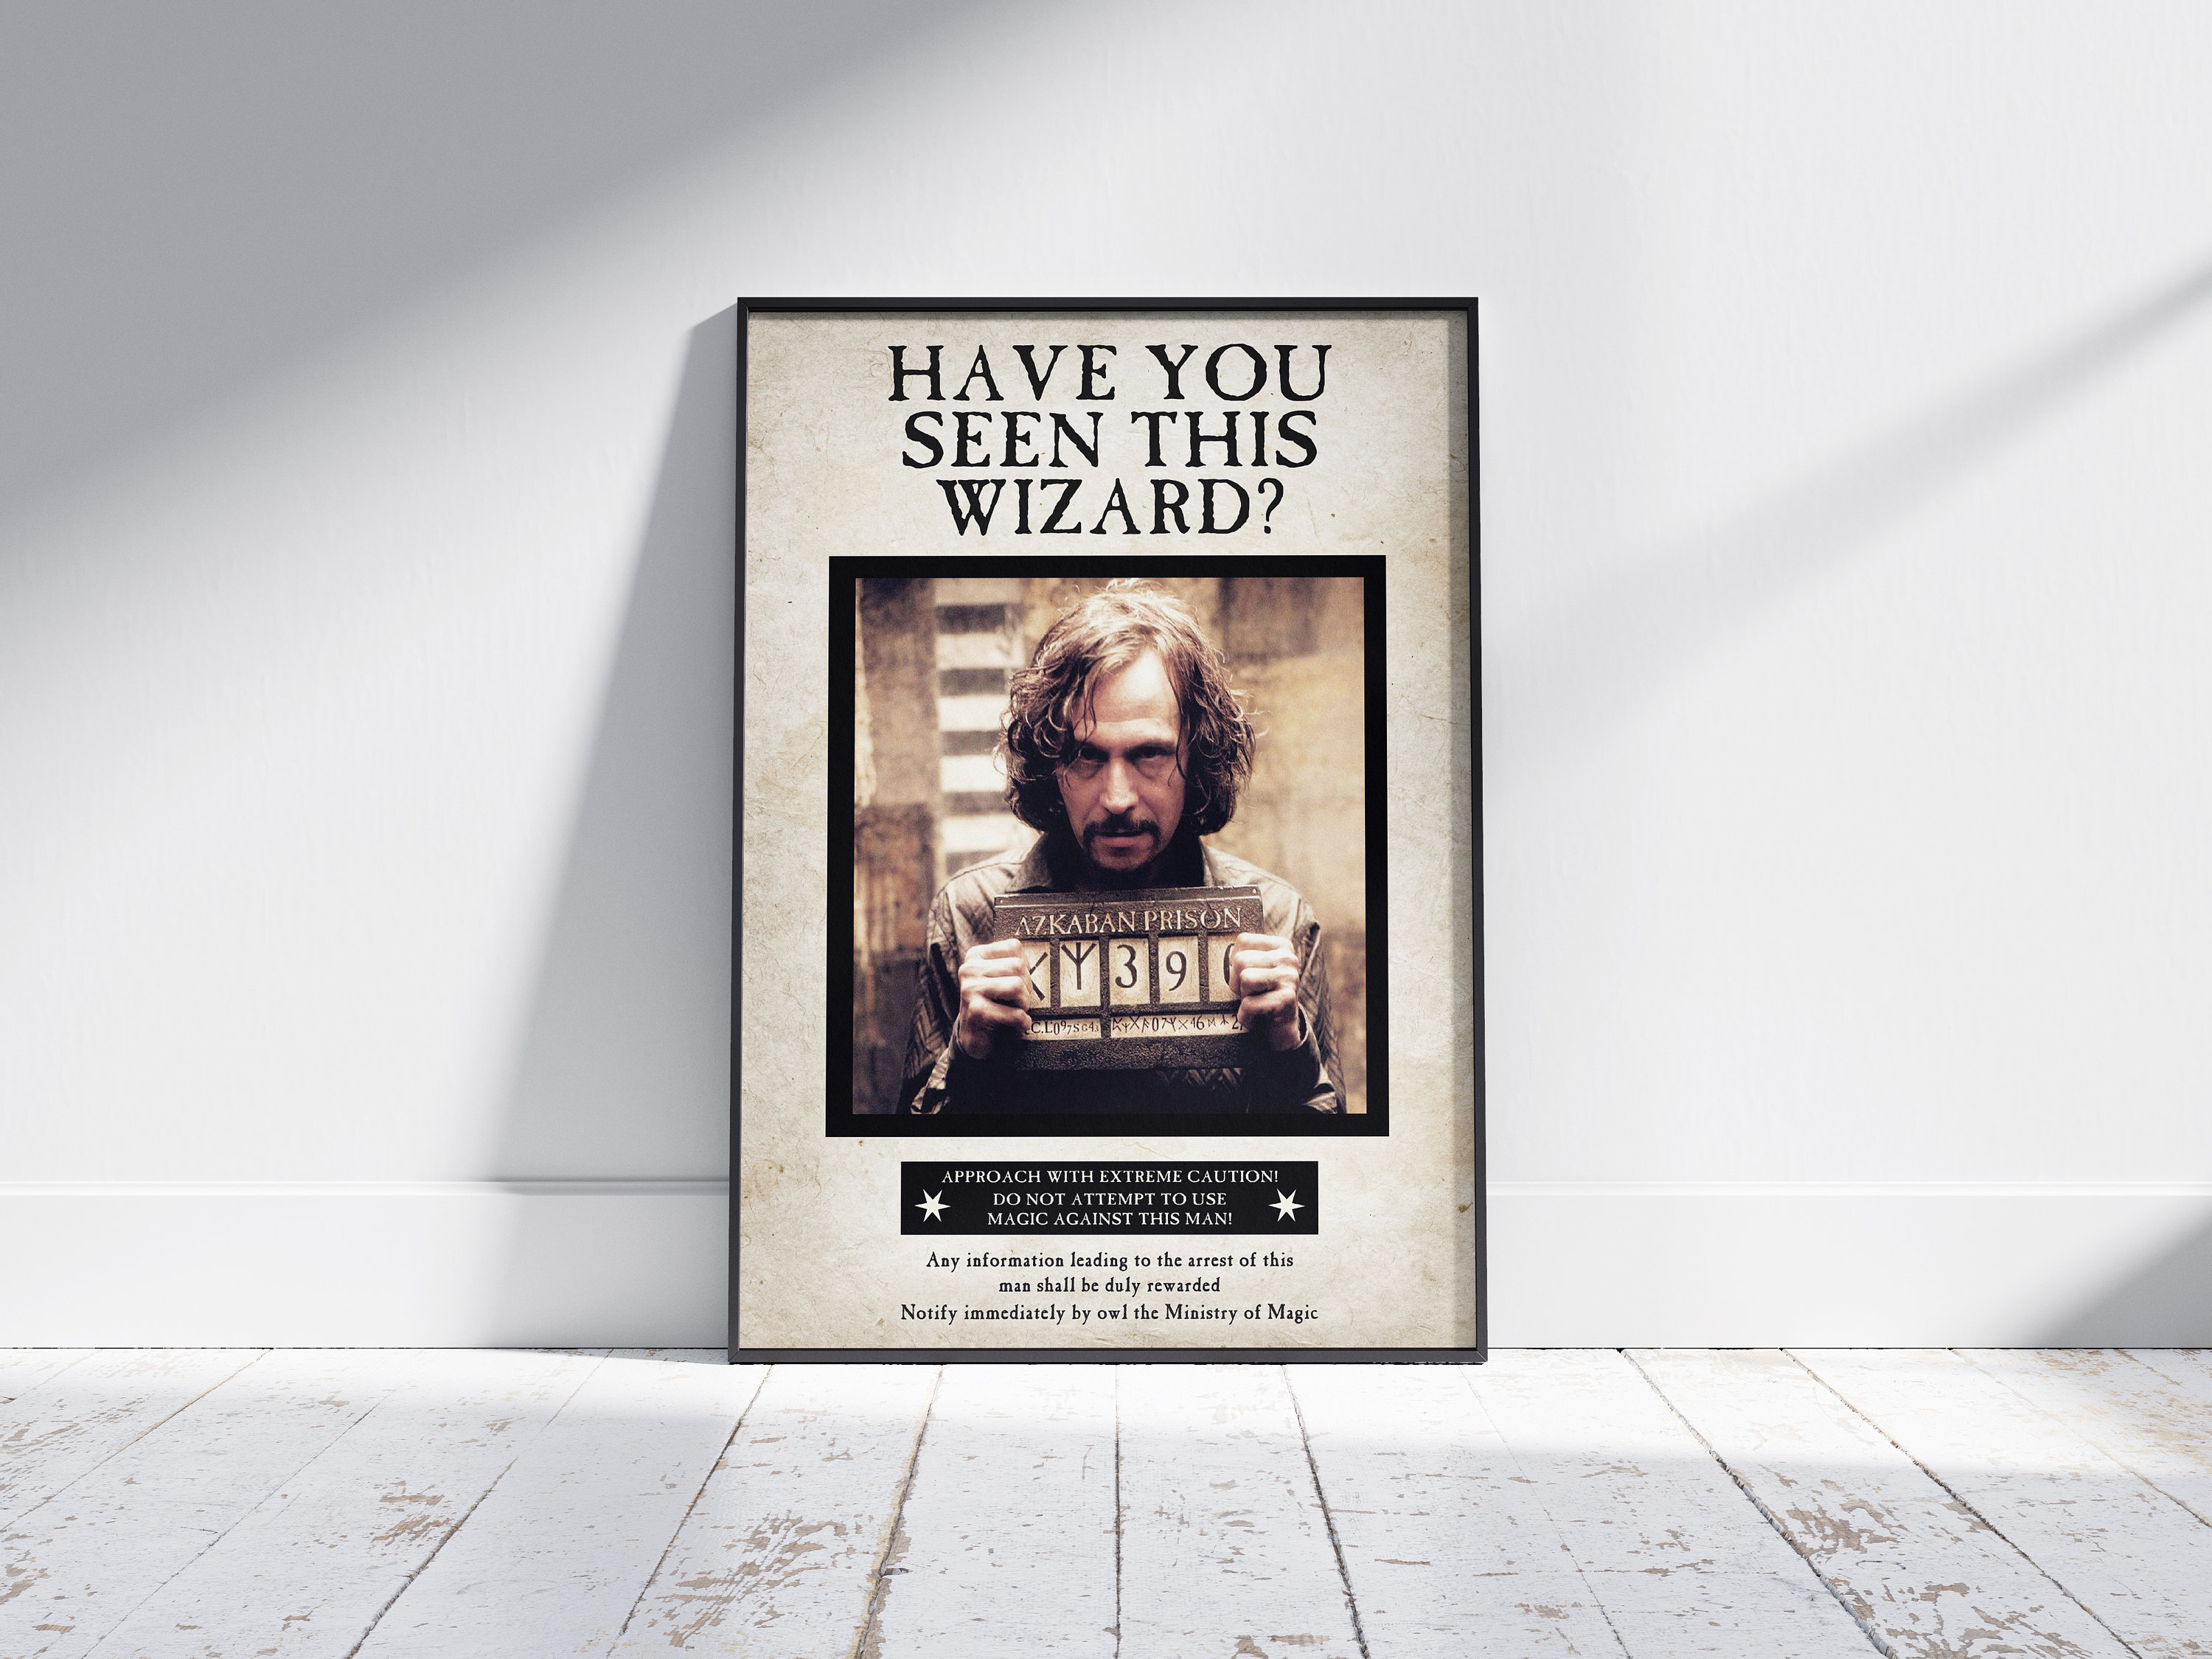 Vintage Harry Potter Wanted Poster - Venngage